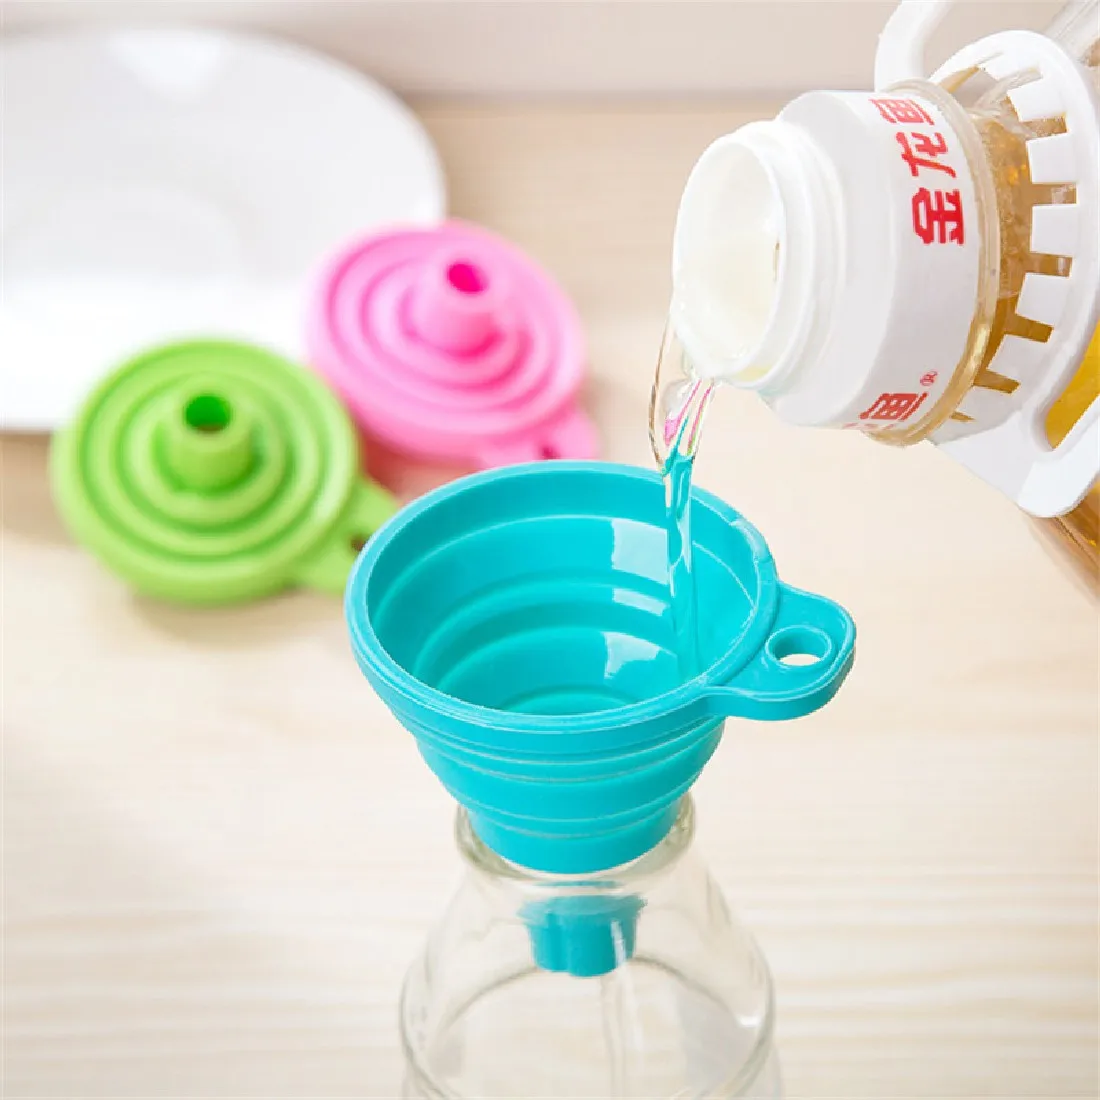 

Protable Mini Silicone Gel Funnel Hopper Foldable Funnel Kitchen Cooking Tools Accessories Gadgets Funnel